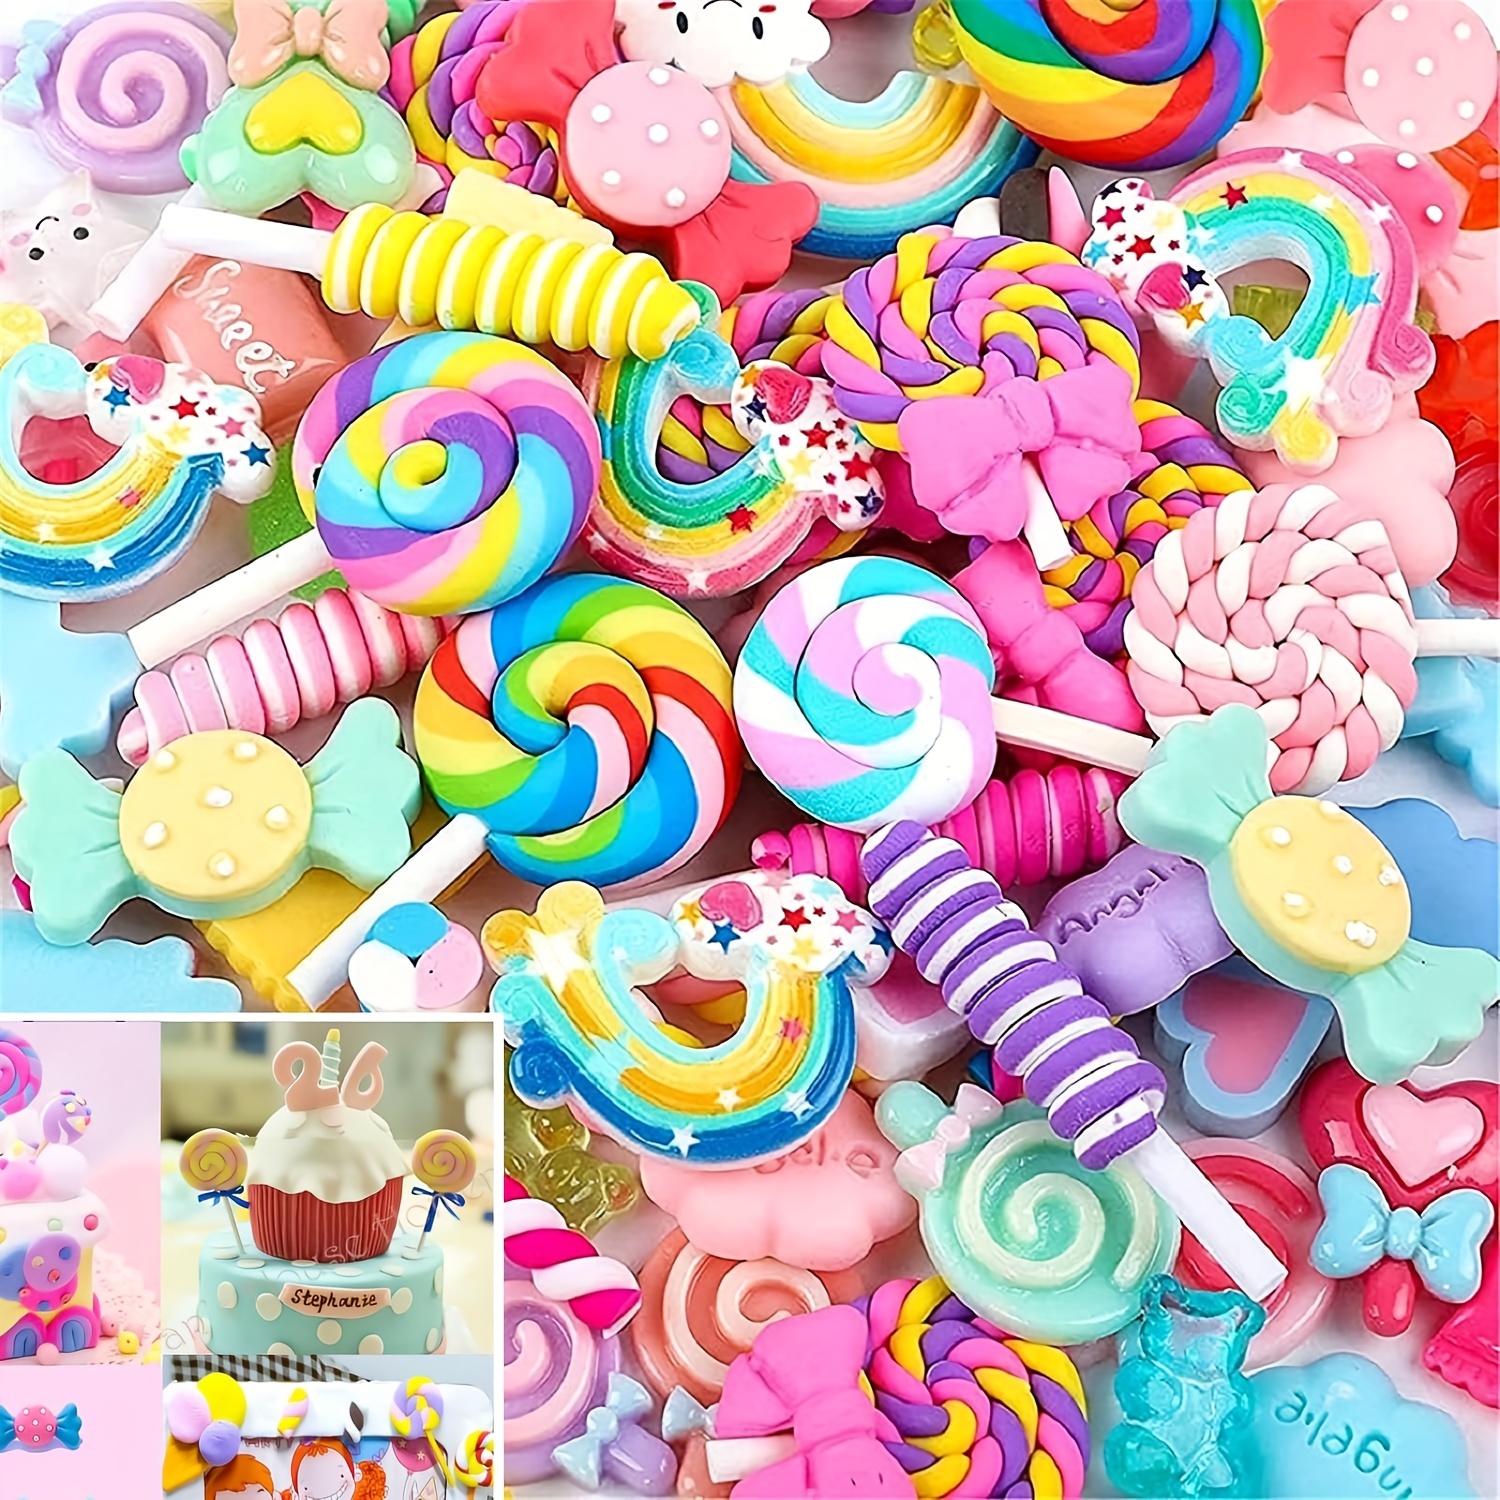 100g Resin Flatbacks Slime Accessories Clay Sprinkles Decoration for Slime Charms Filler DIY Slime Supplies Fake Candy Chocolate Cake Dessert Mud